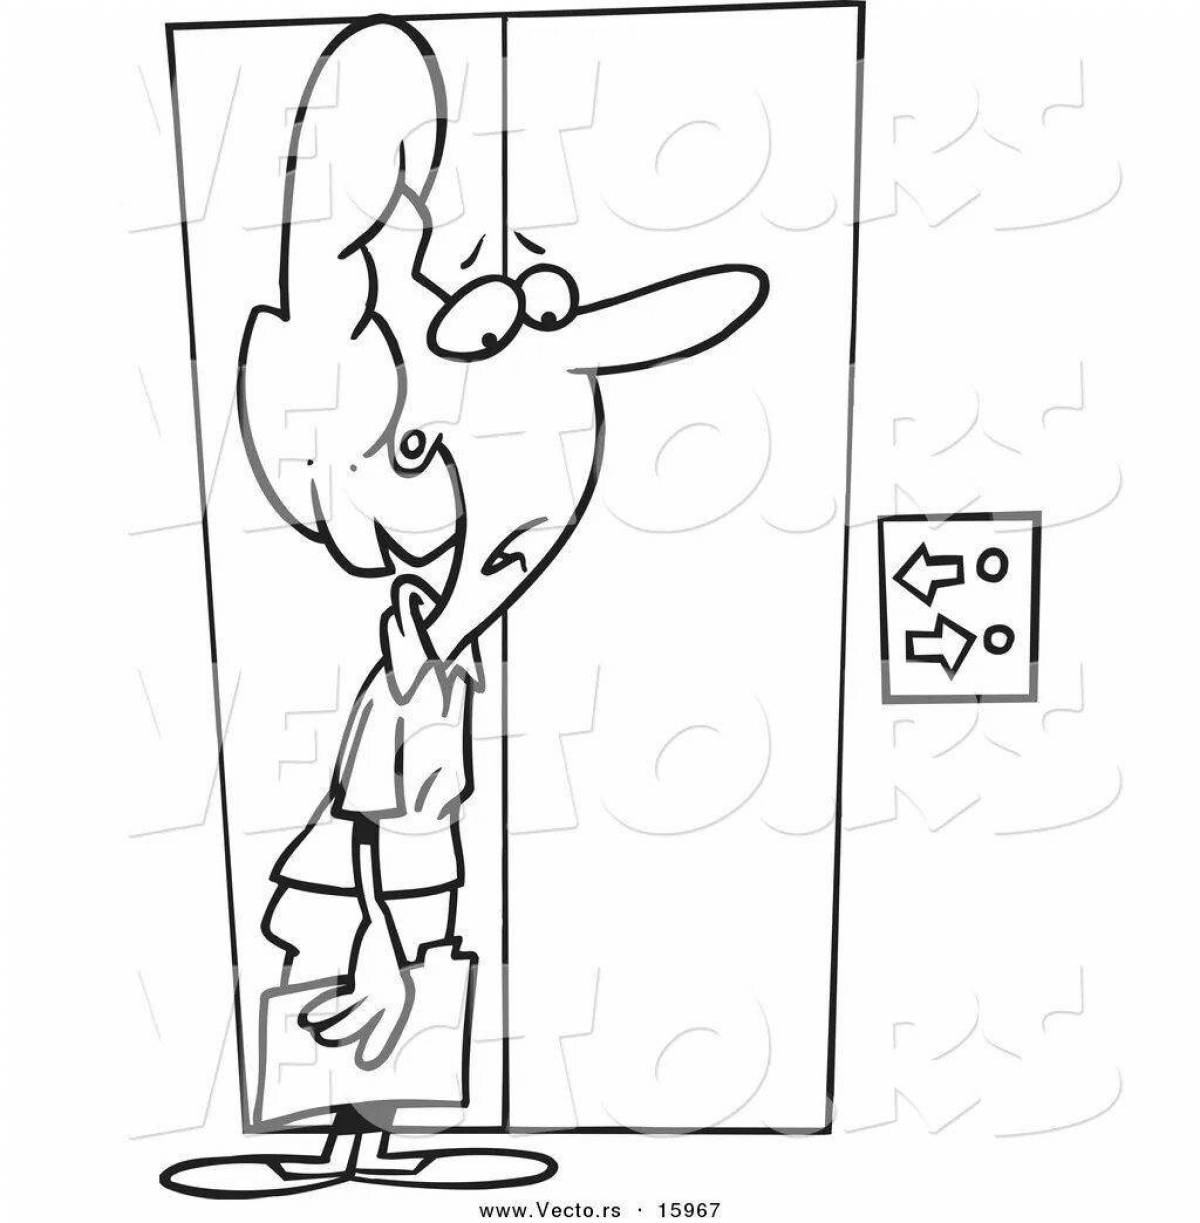 Silly elevator coloring book for kids